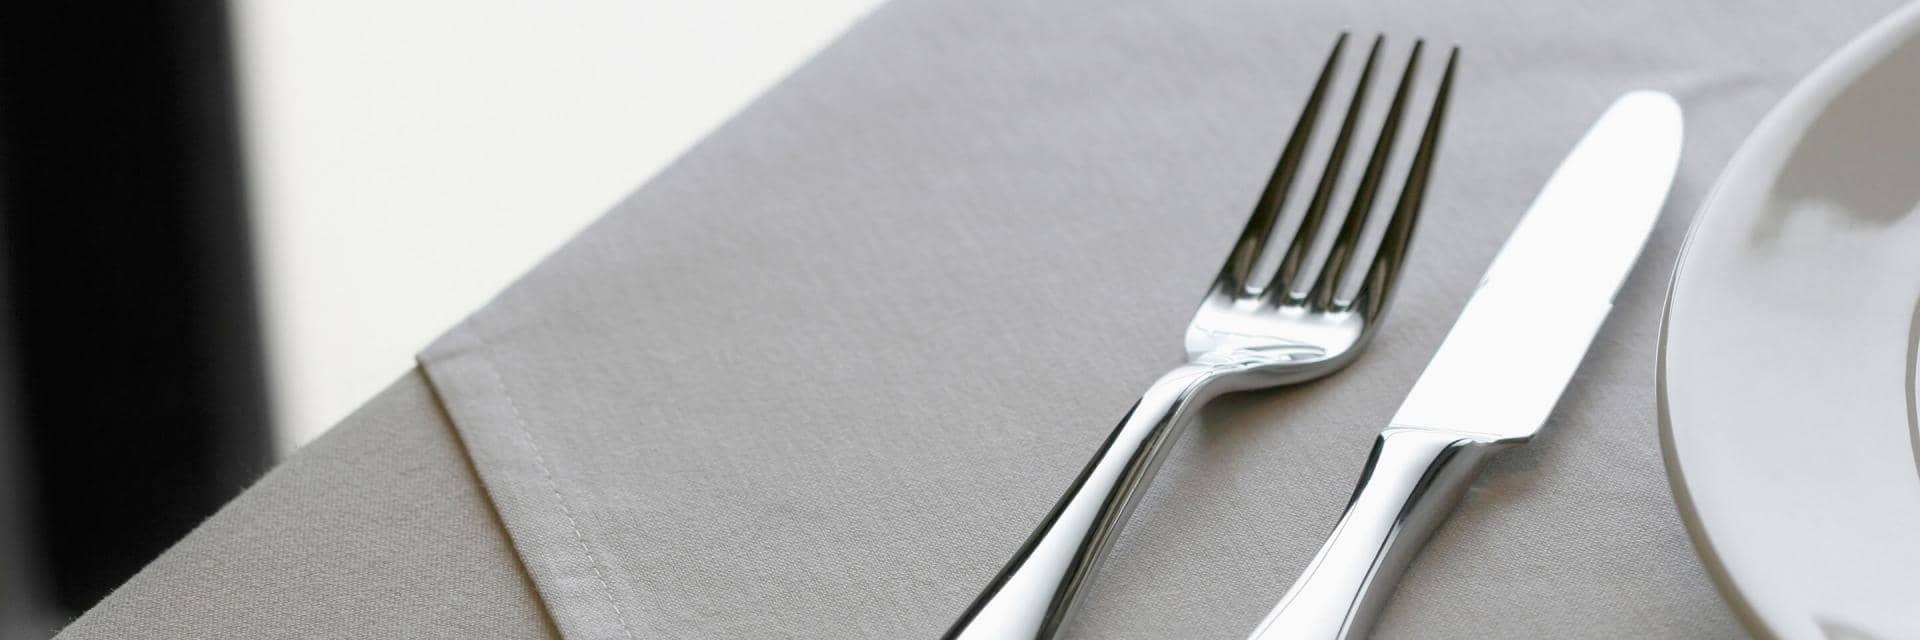  A knife and fork, and a side plate on top of a pale grey napkin